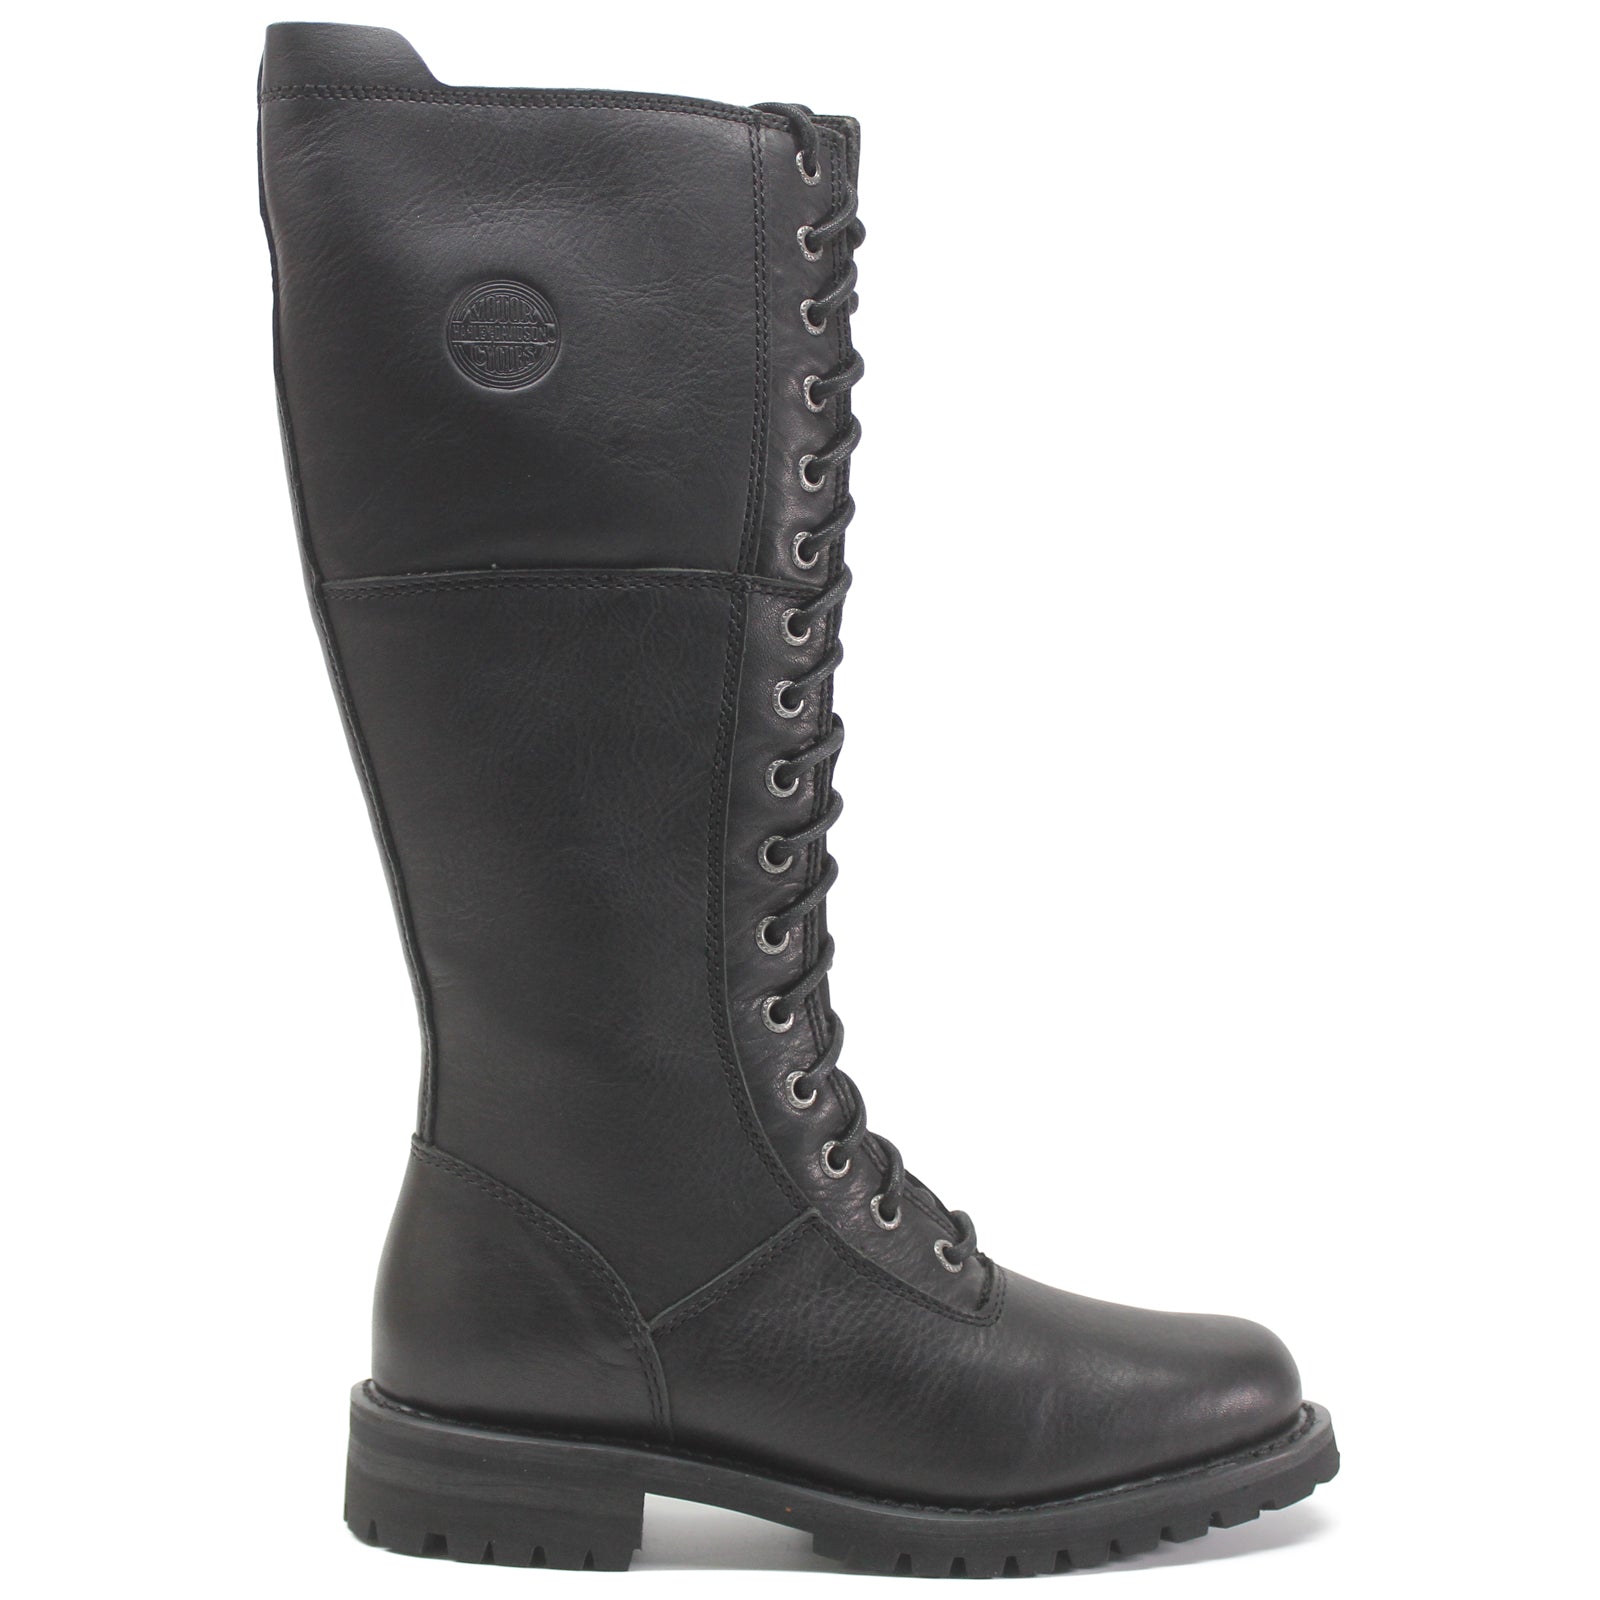 Harley Davidson Walfield Full Grain Leather Women's Knee High Riding Boots#color_black